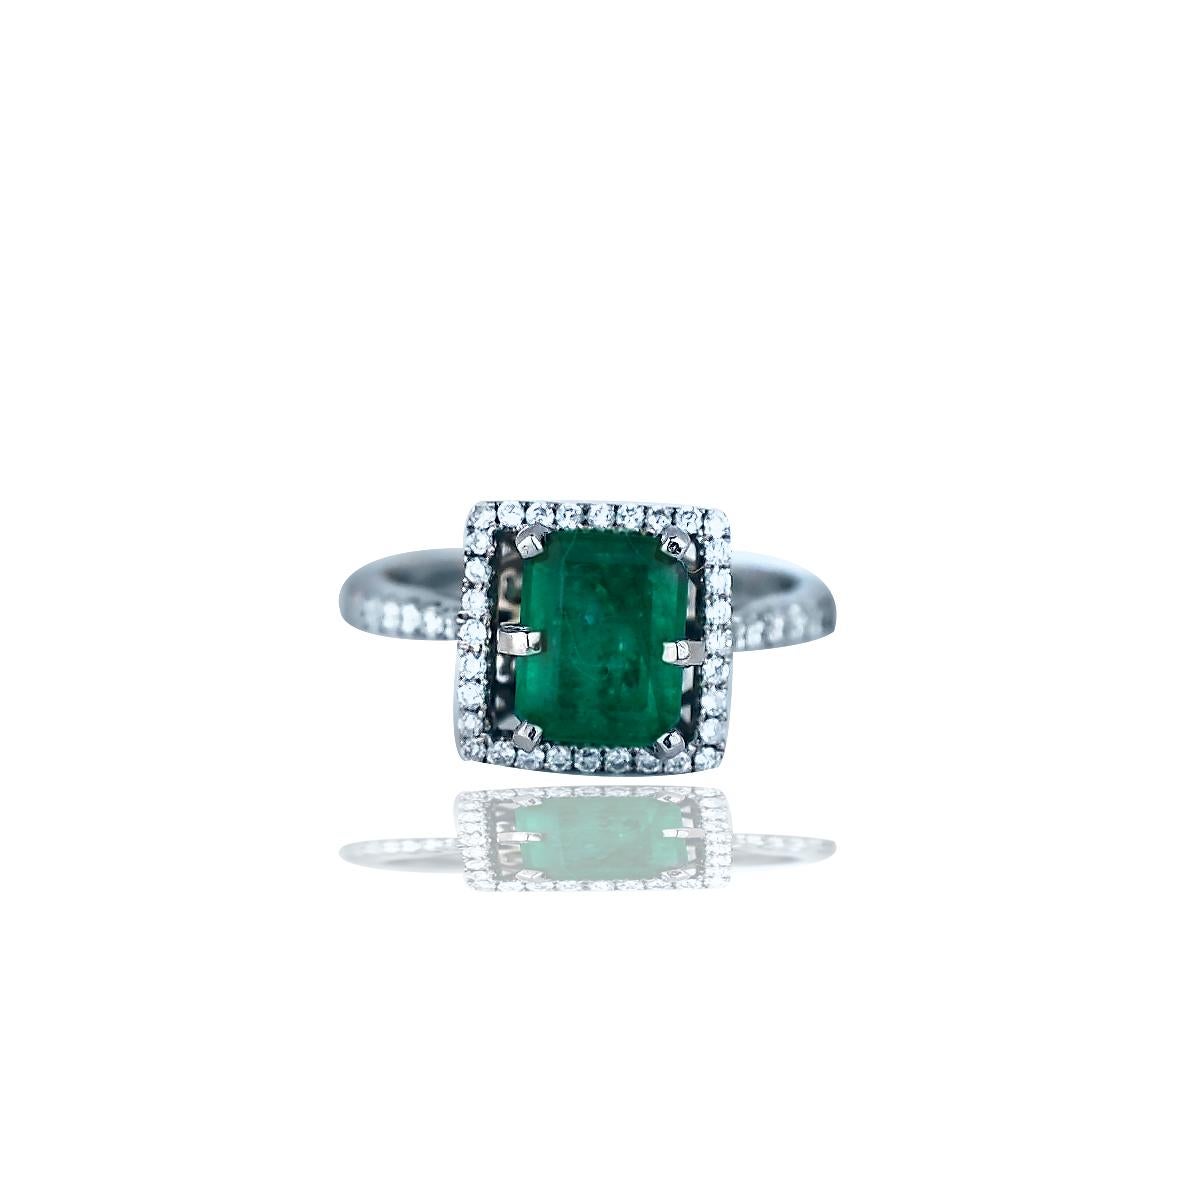 Contemporary 2.48 Carat Colombian Emerald and Diamond Halo Ring